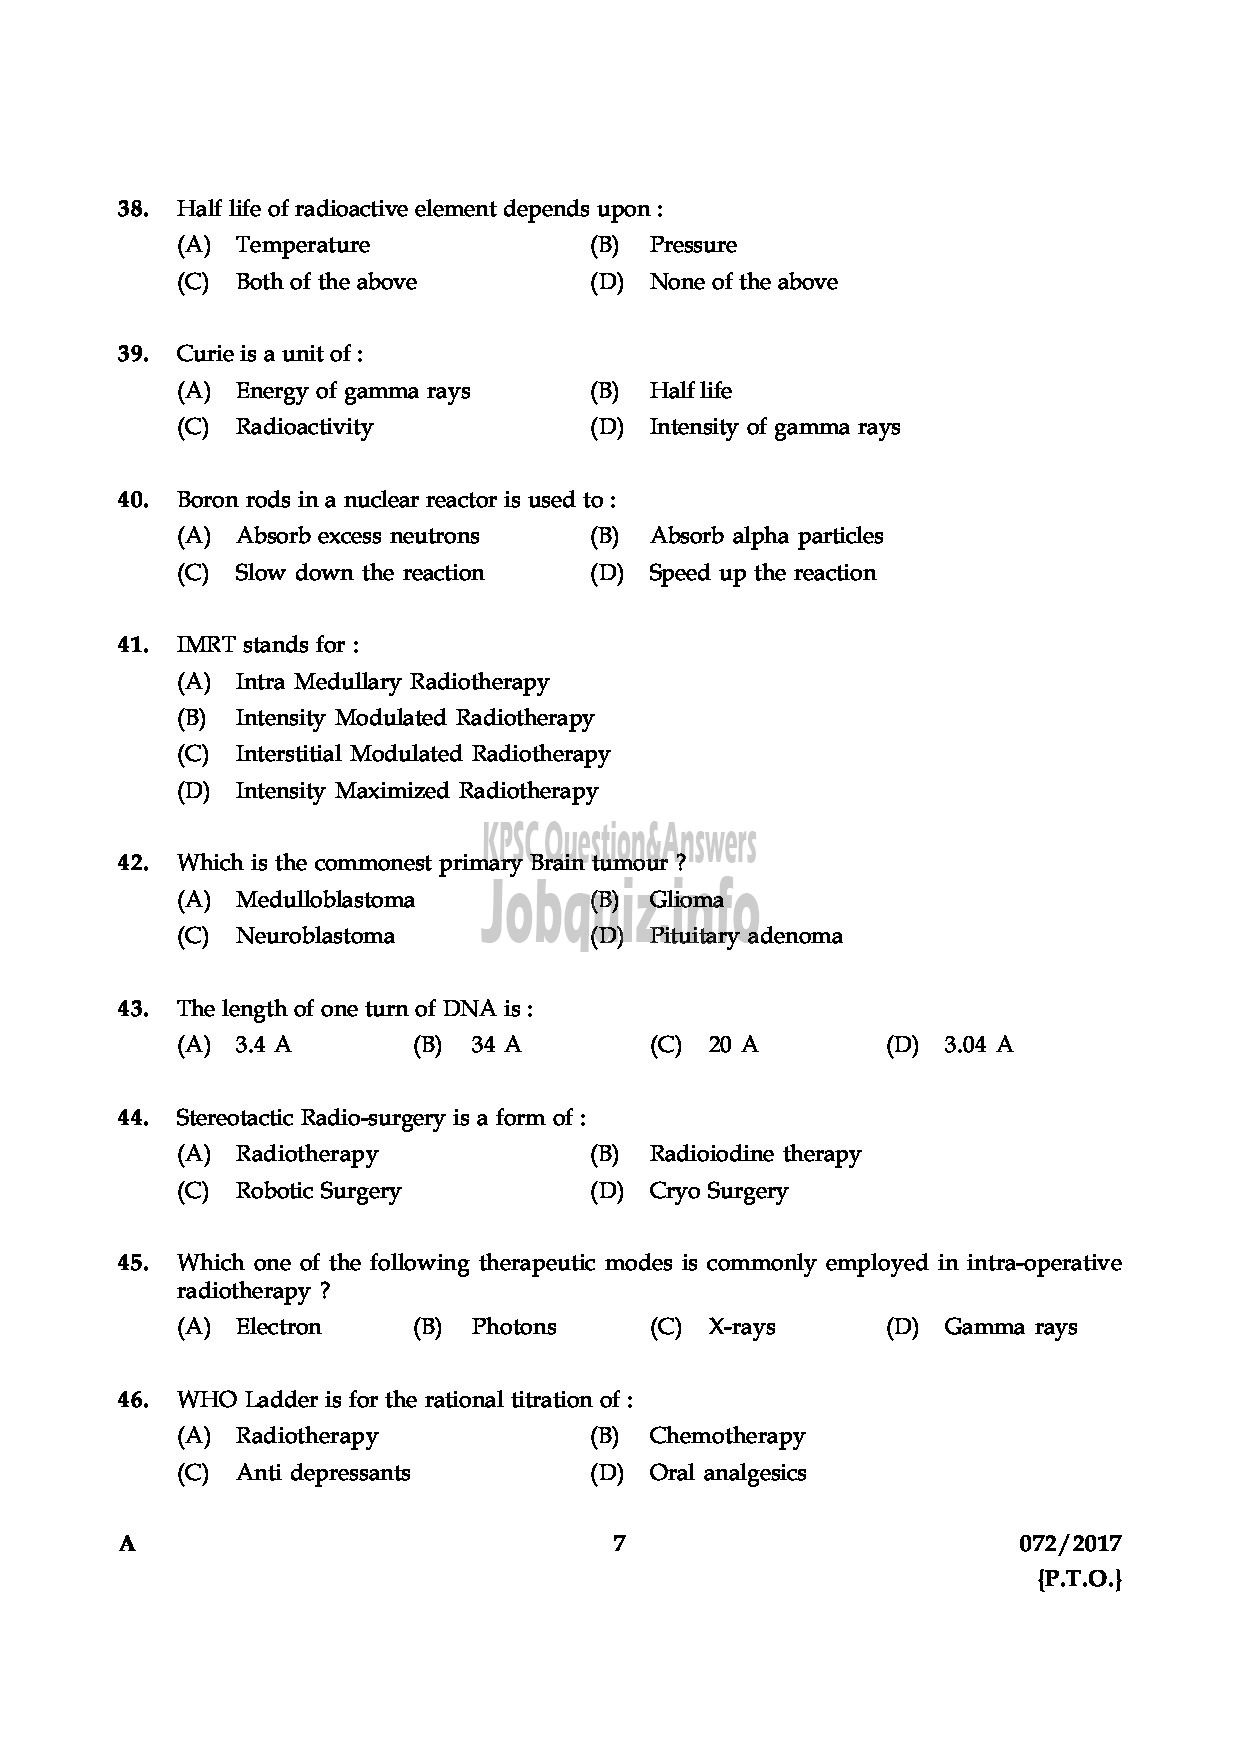 Kerala PSC Question Paper - RADIOGRAPHER GR.II HEALTH SERVICES QUESTION PAPER-6